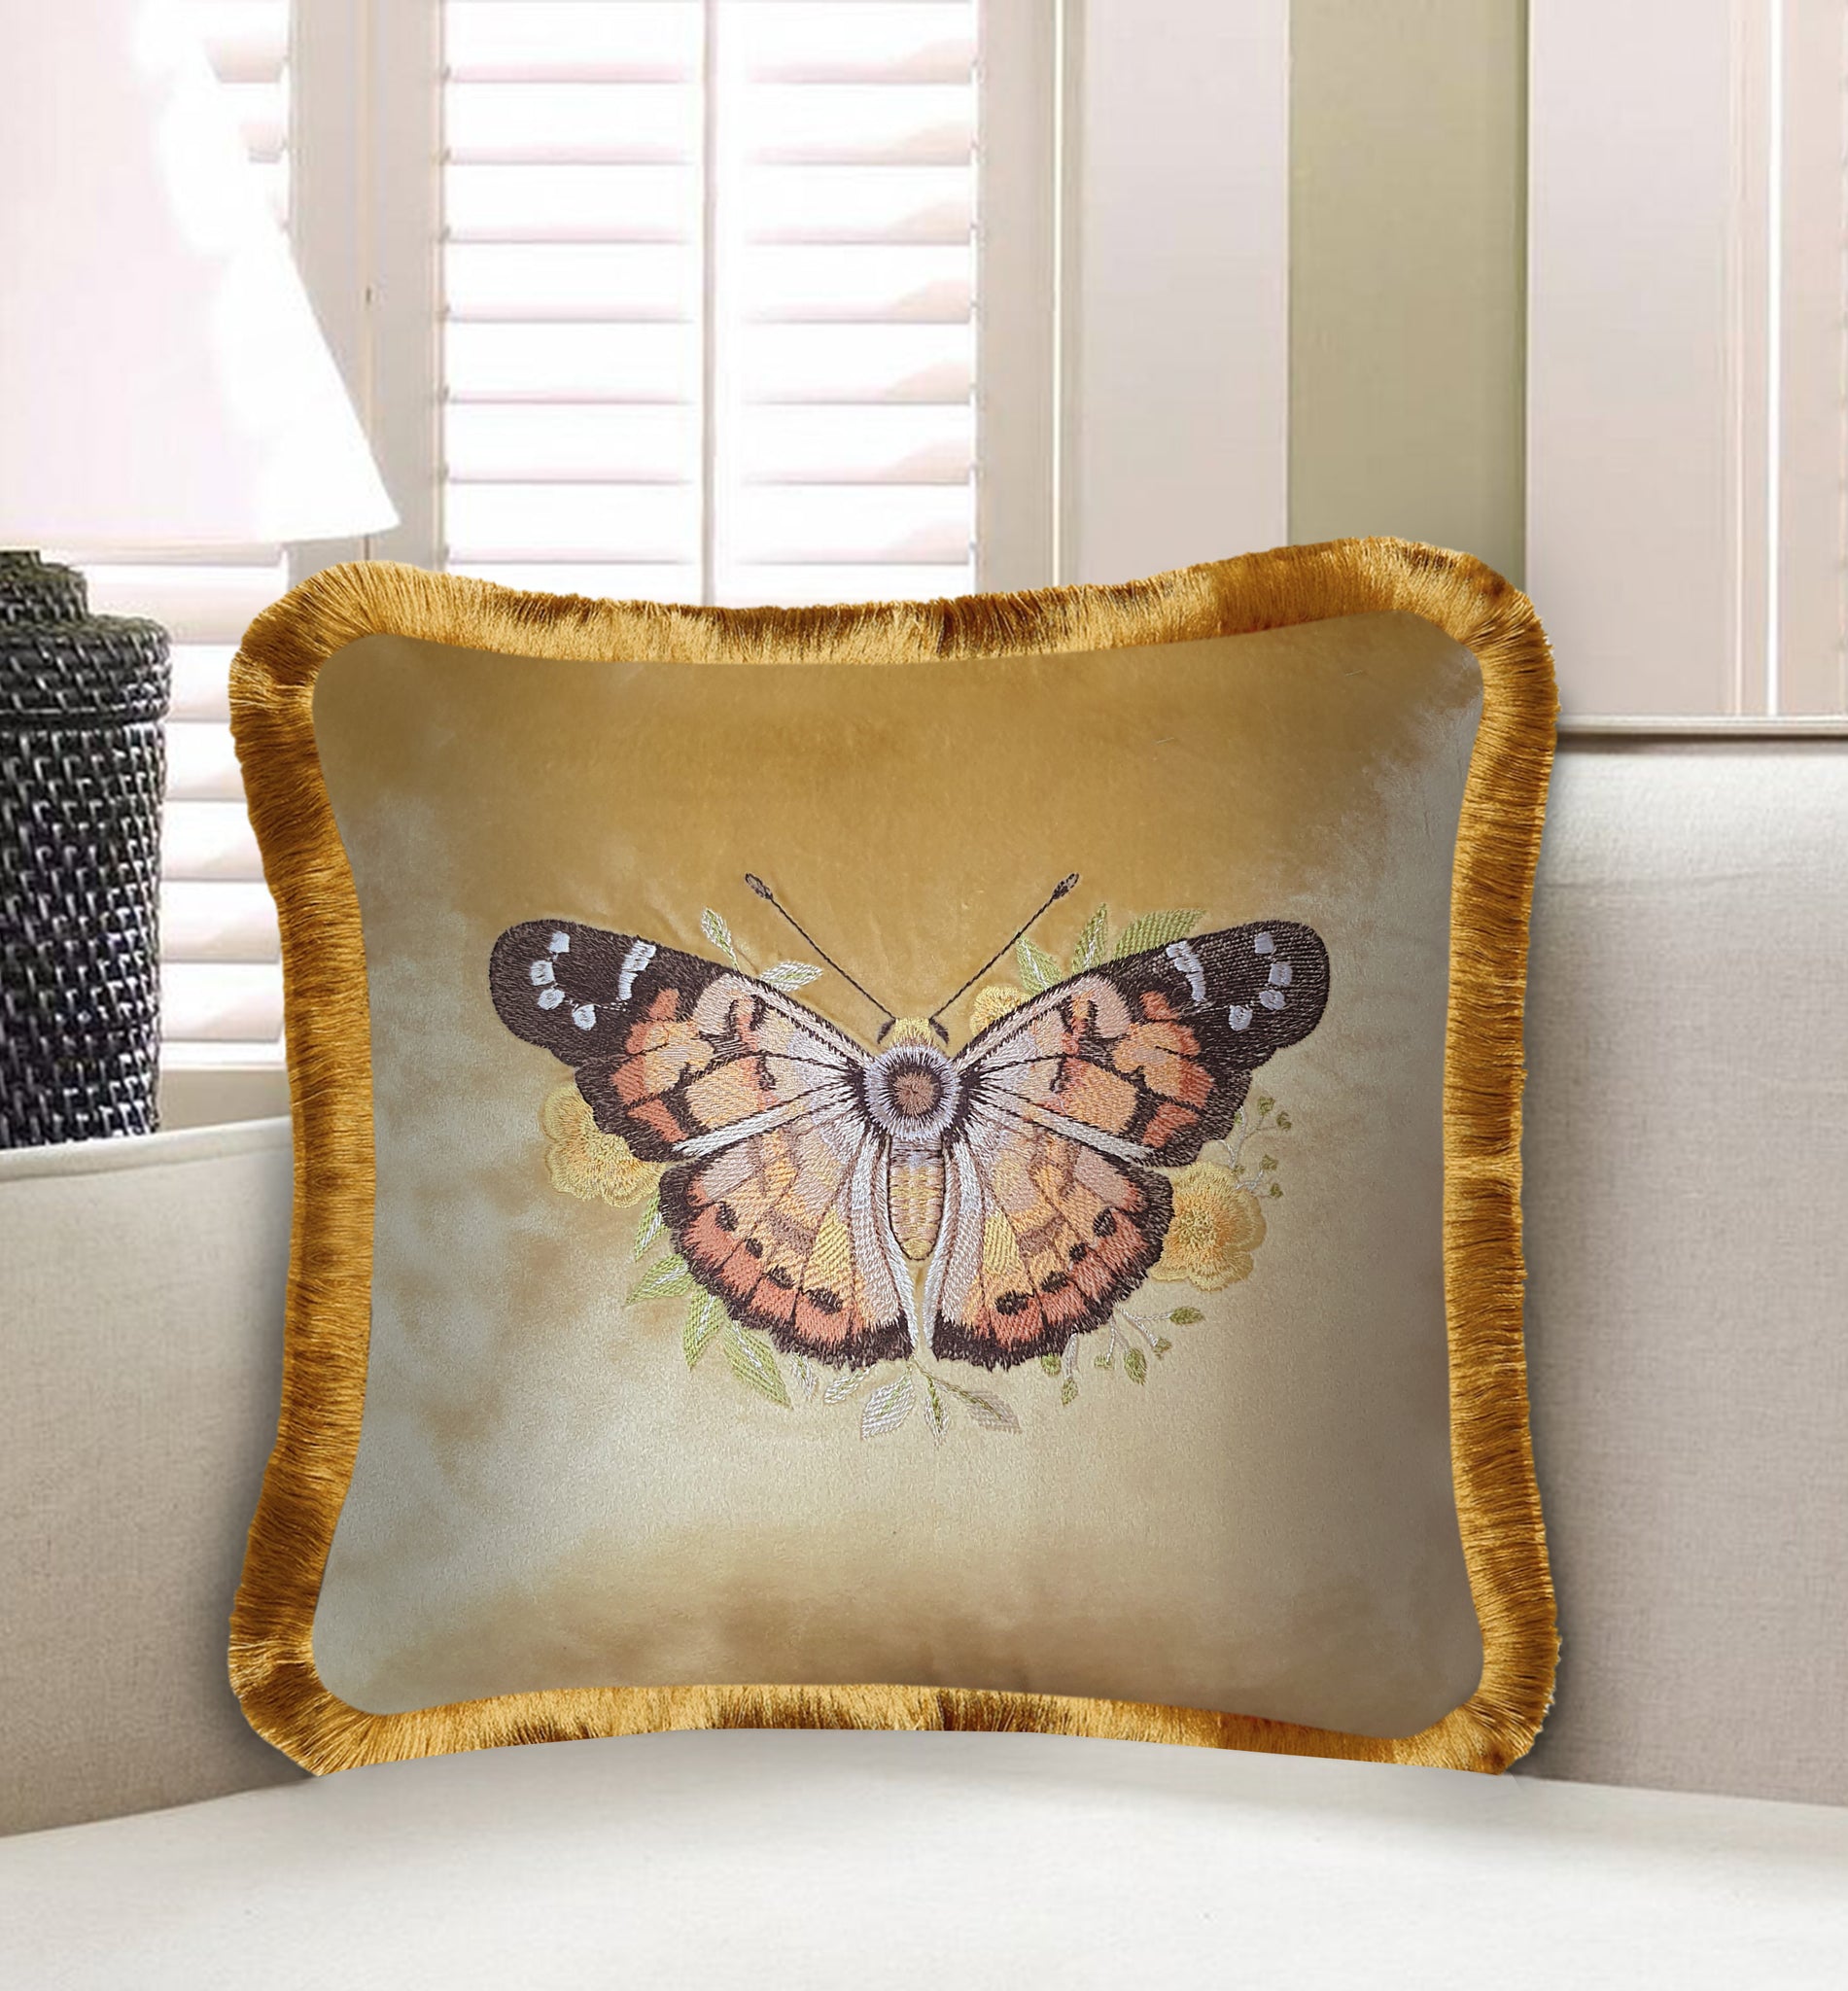 Velvet Cushion Cover Colorful Butterfly Embroidery Decorative Pillowcase Modern Home Decor Throw Pillow for Sofa Chair 45x45 cm